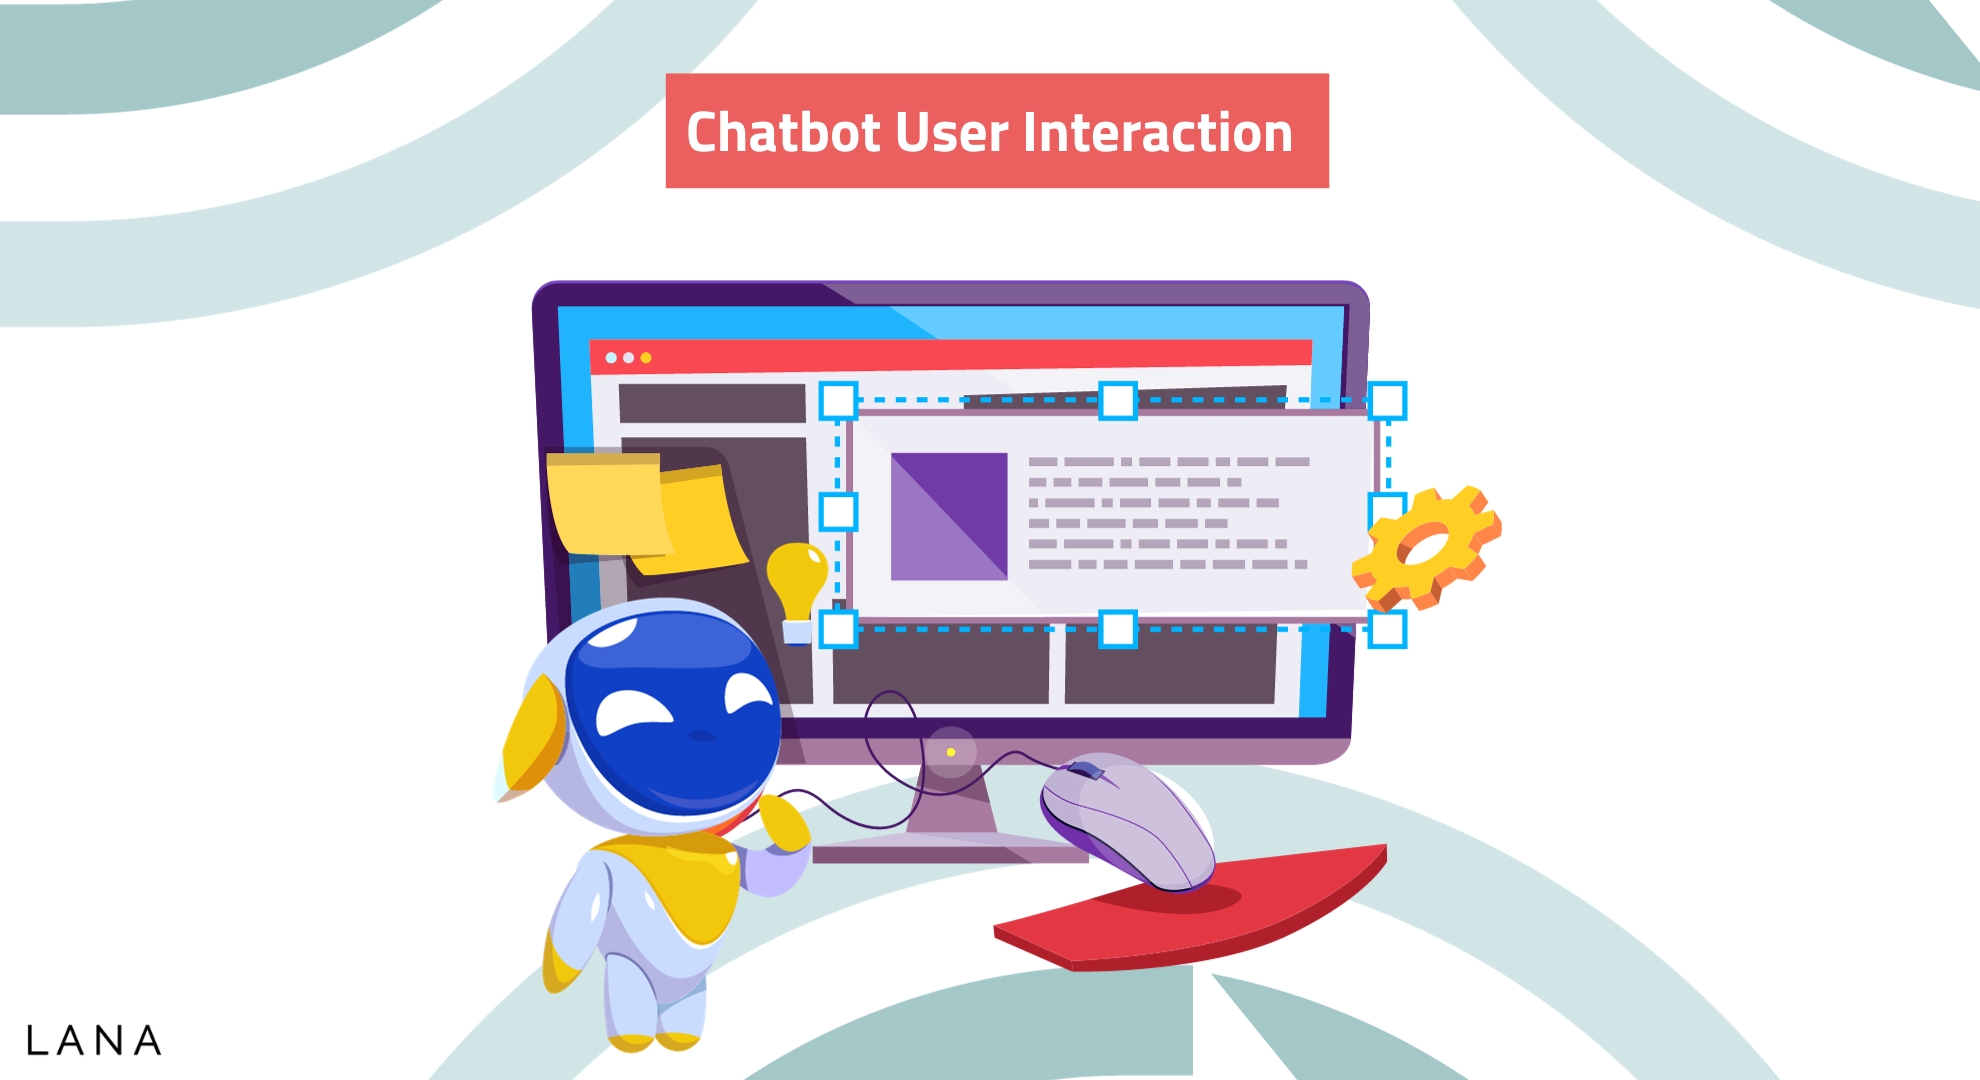 Chatbots to Interact With Users